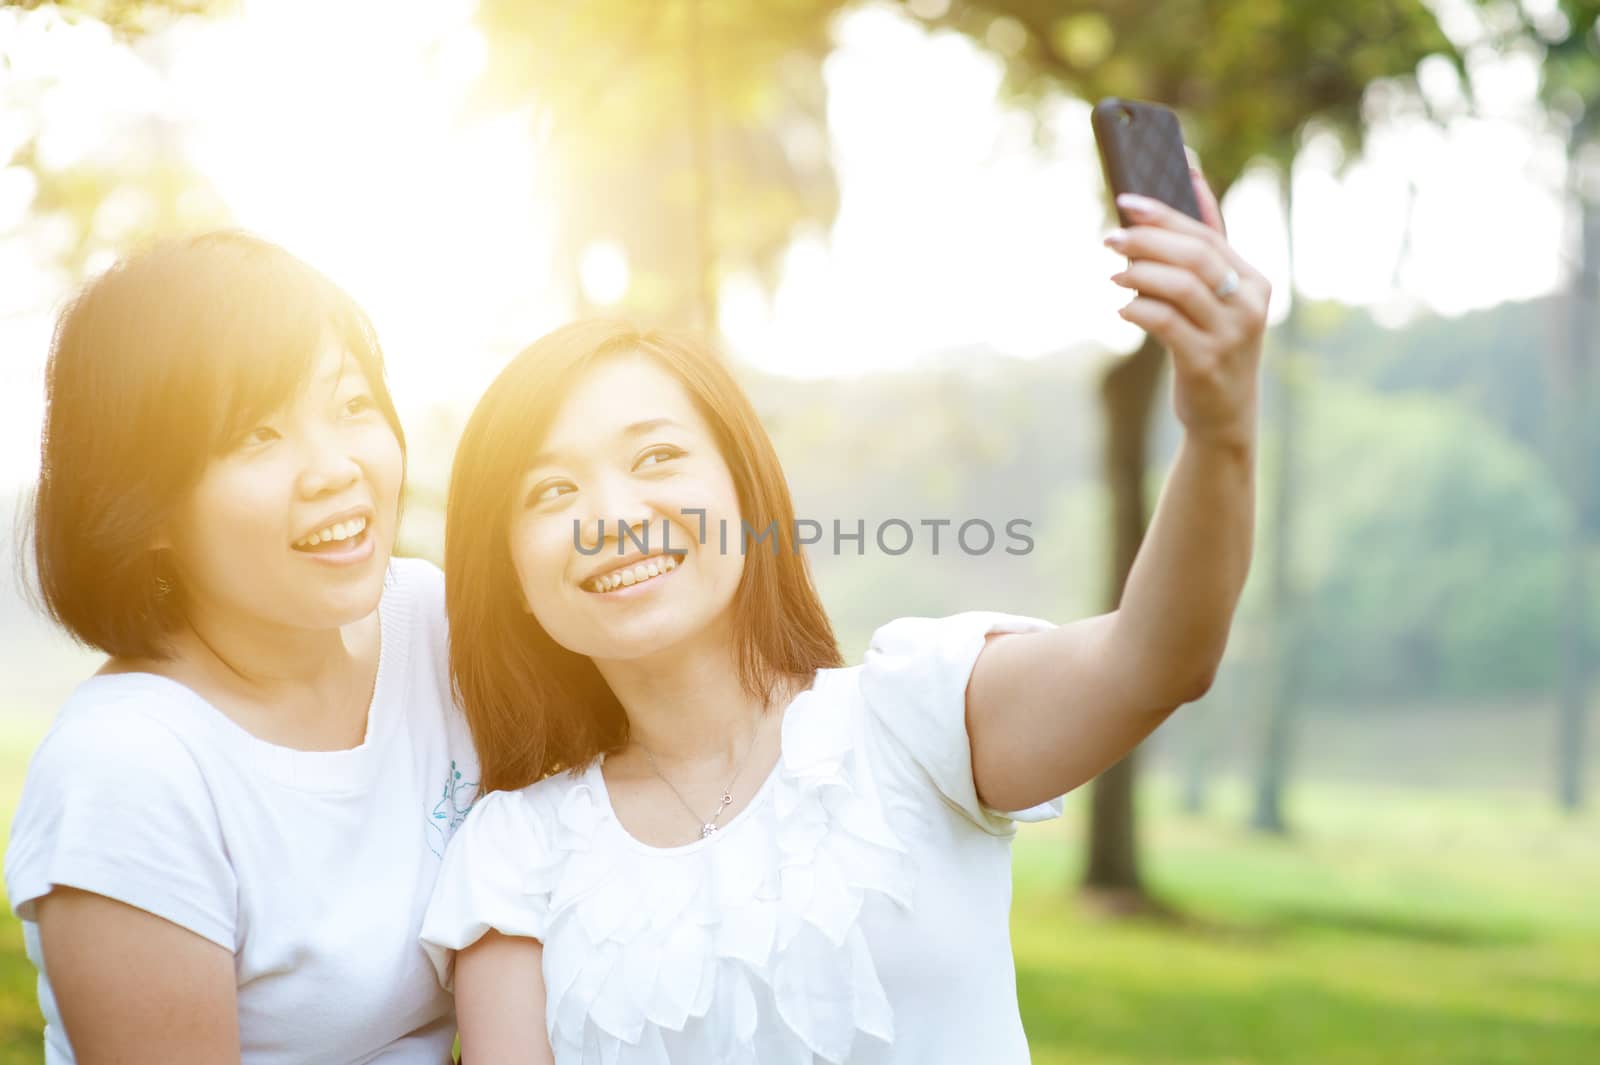 Young Asian females having fun at outdoor park, taking selfie using smartphone camera, sun flare background.